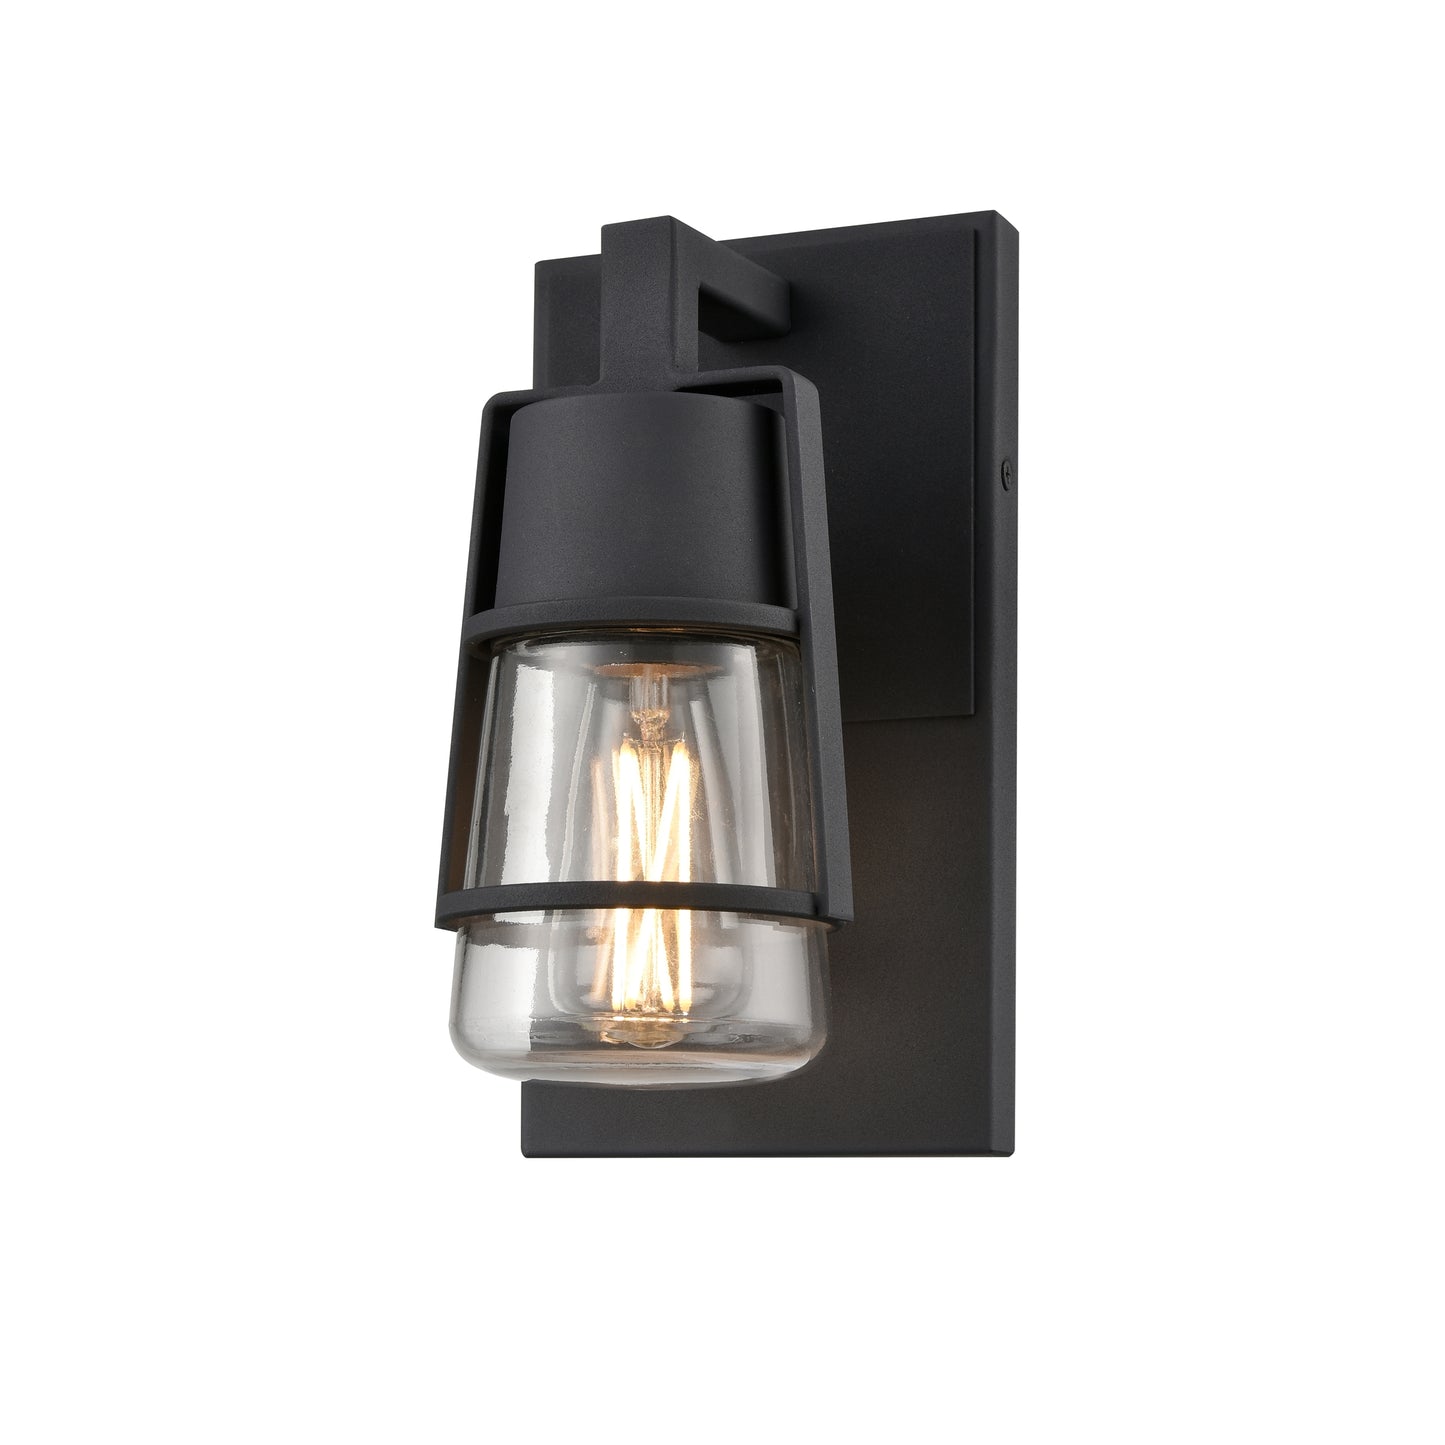 Lake of the Woods Outdoor 1-Light Outdoor Sconce